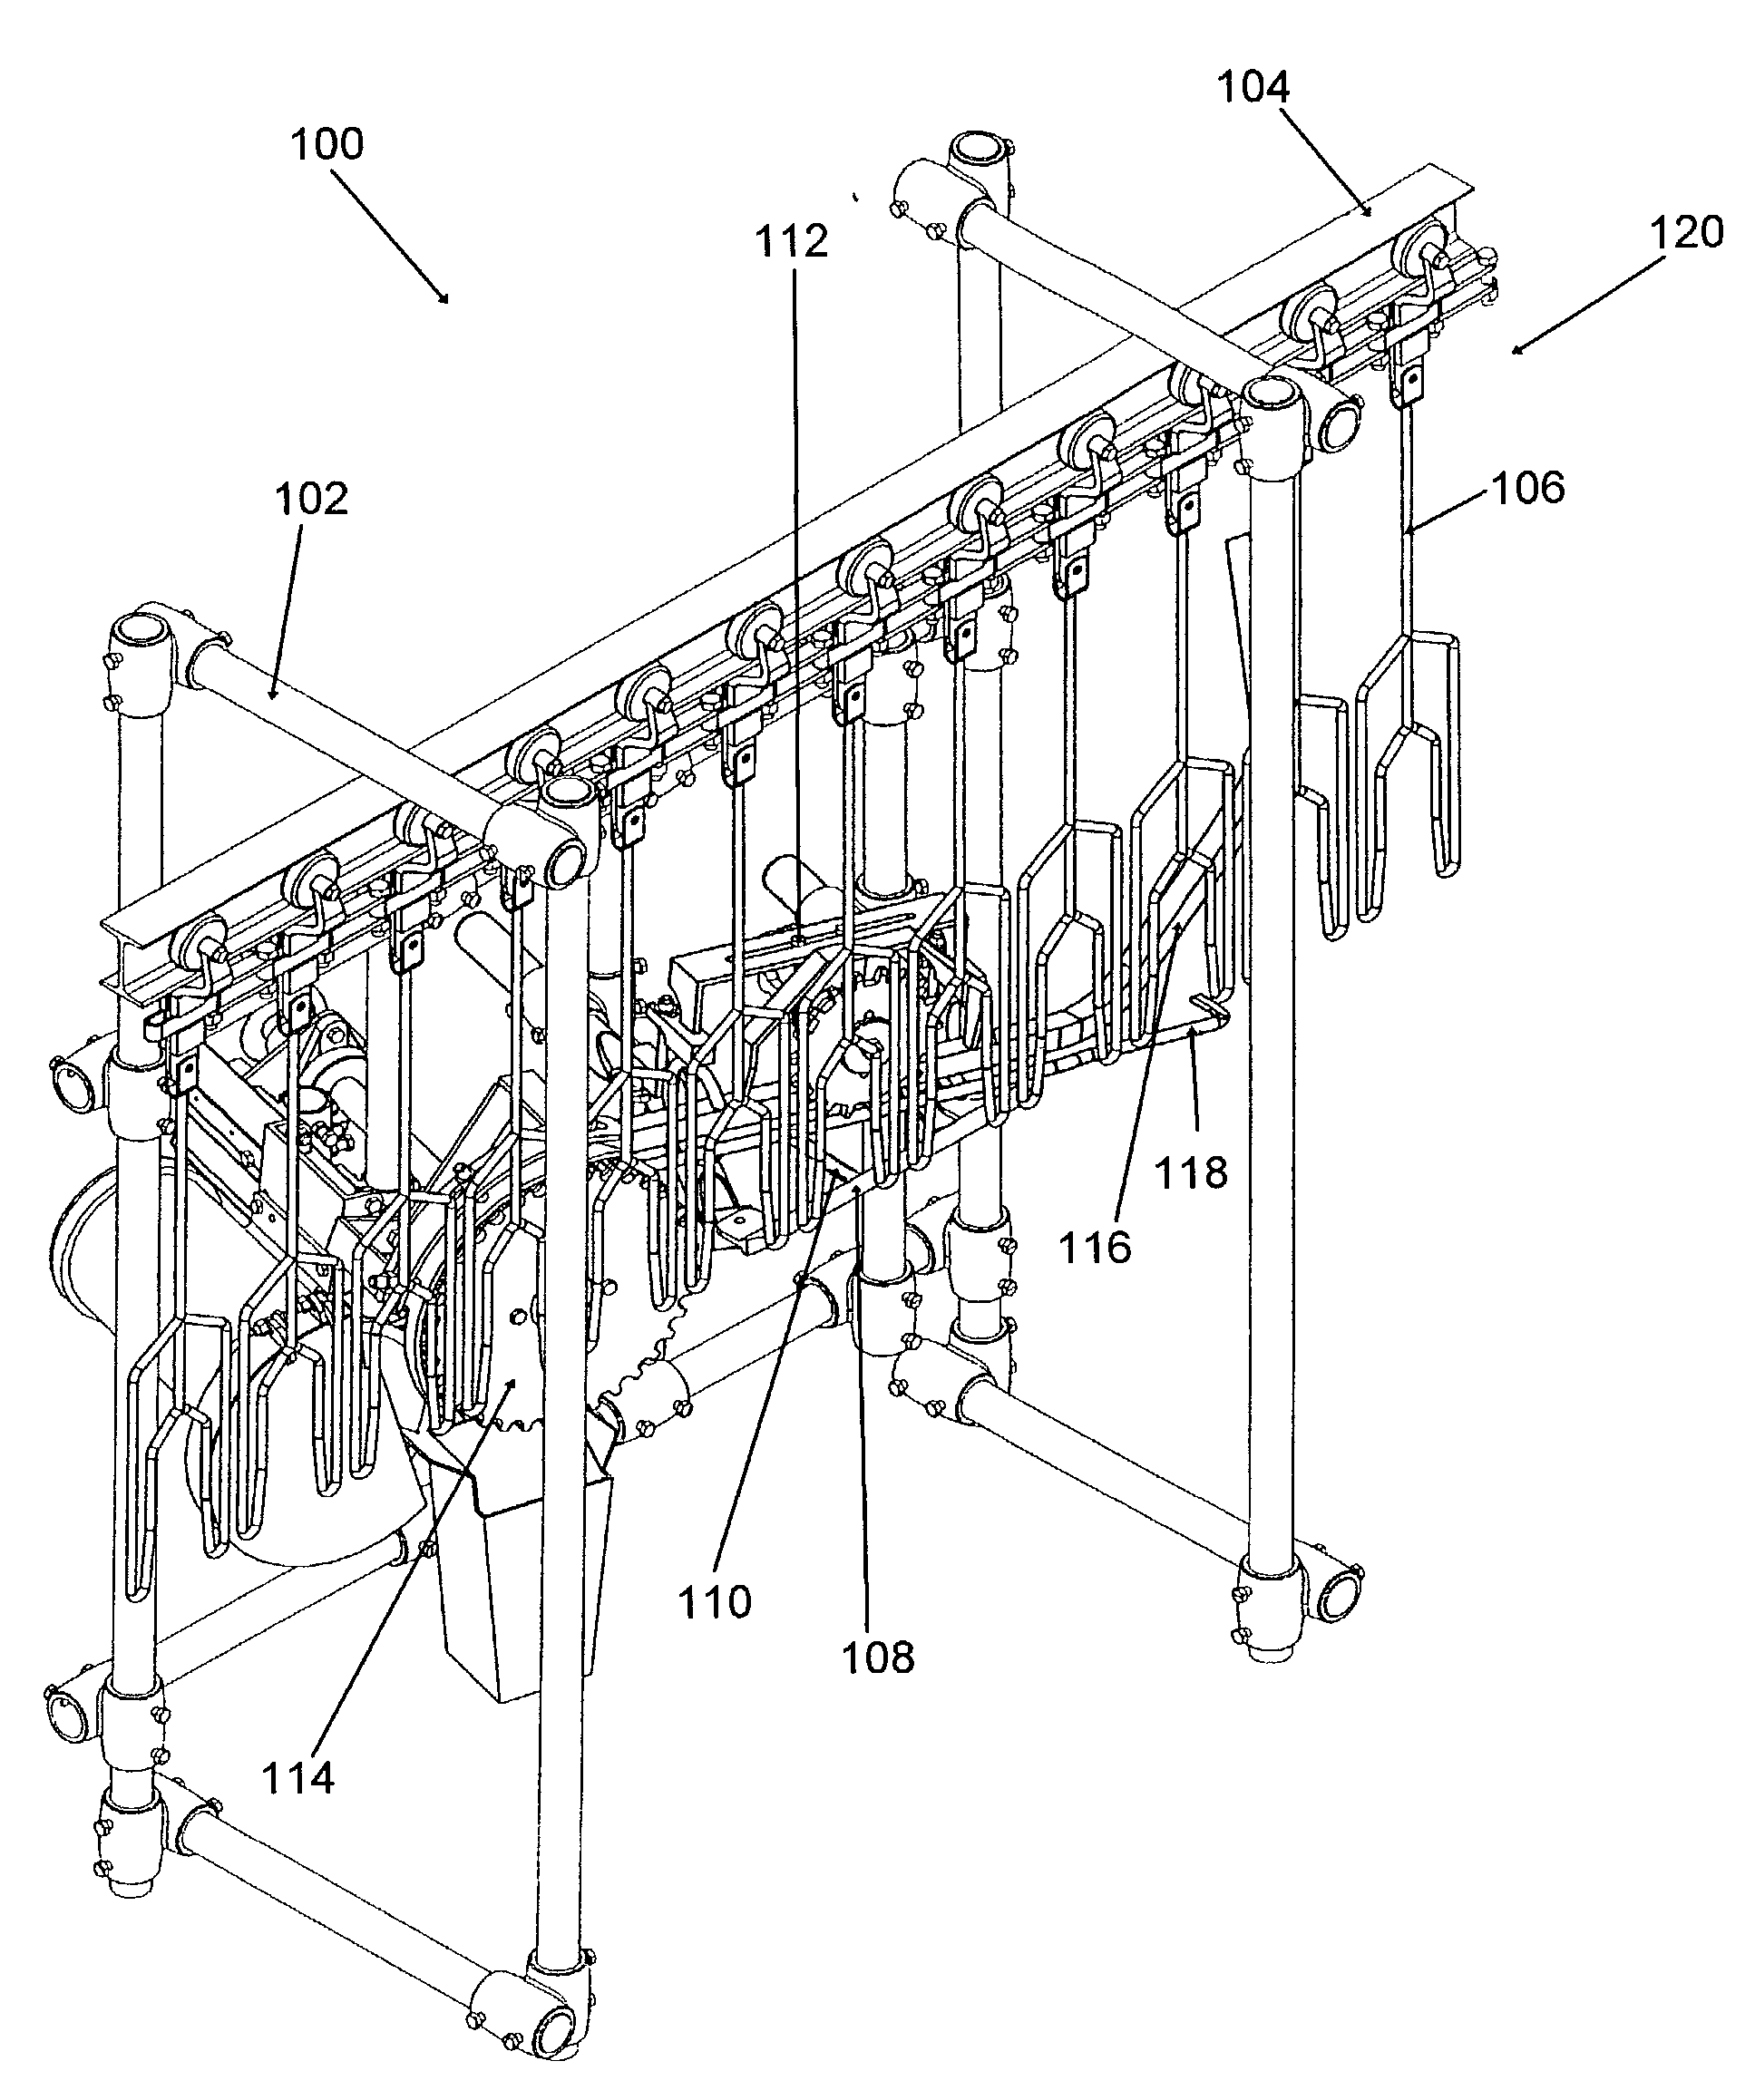 Apparatus and method of edible feet harvest and paw production